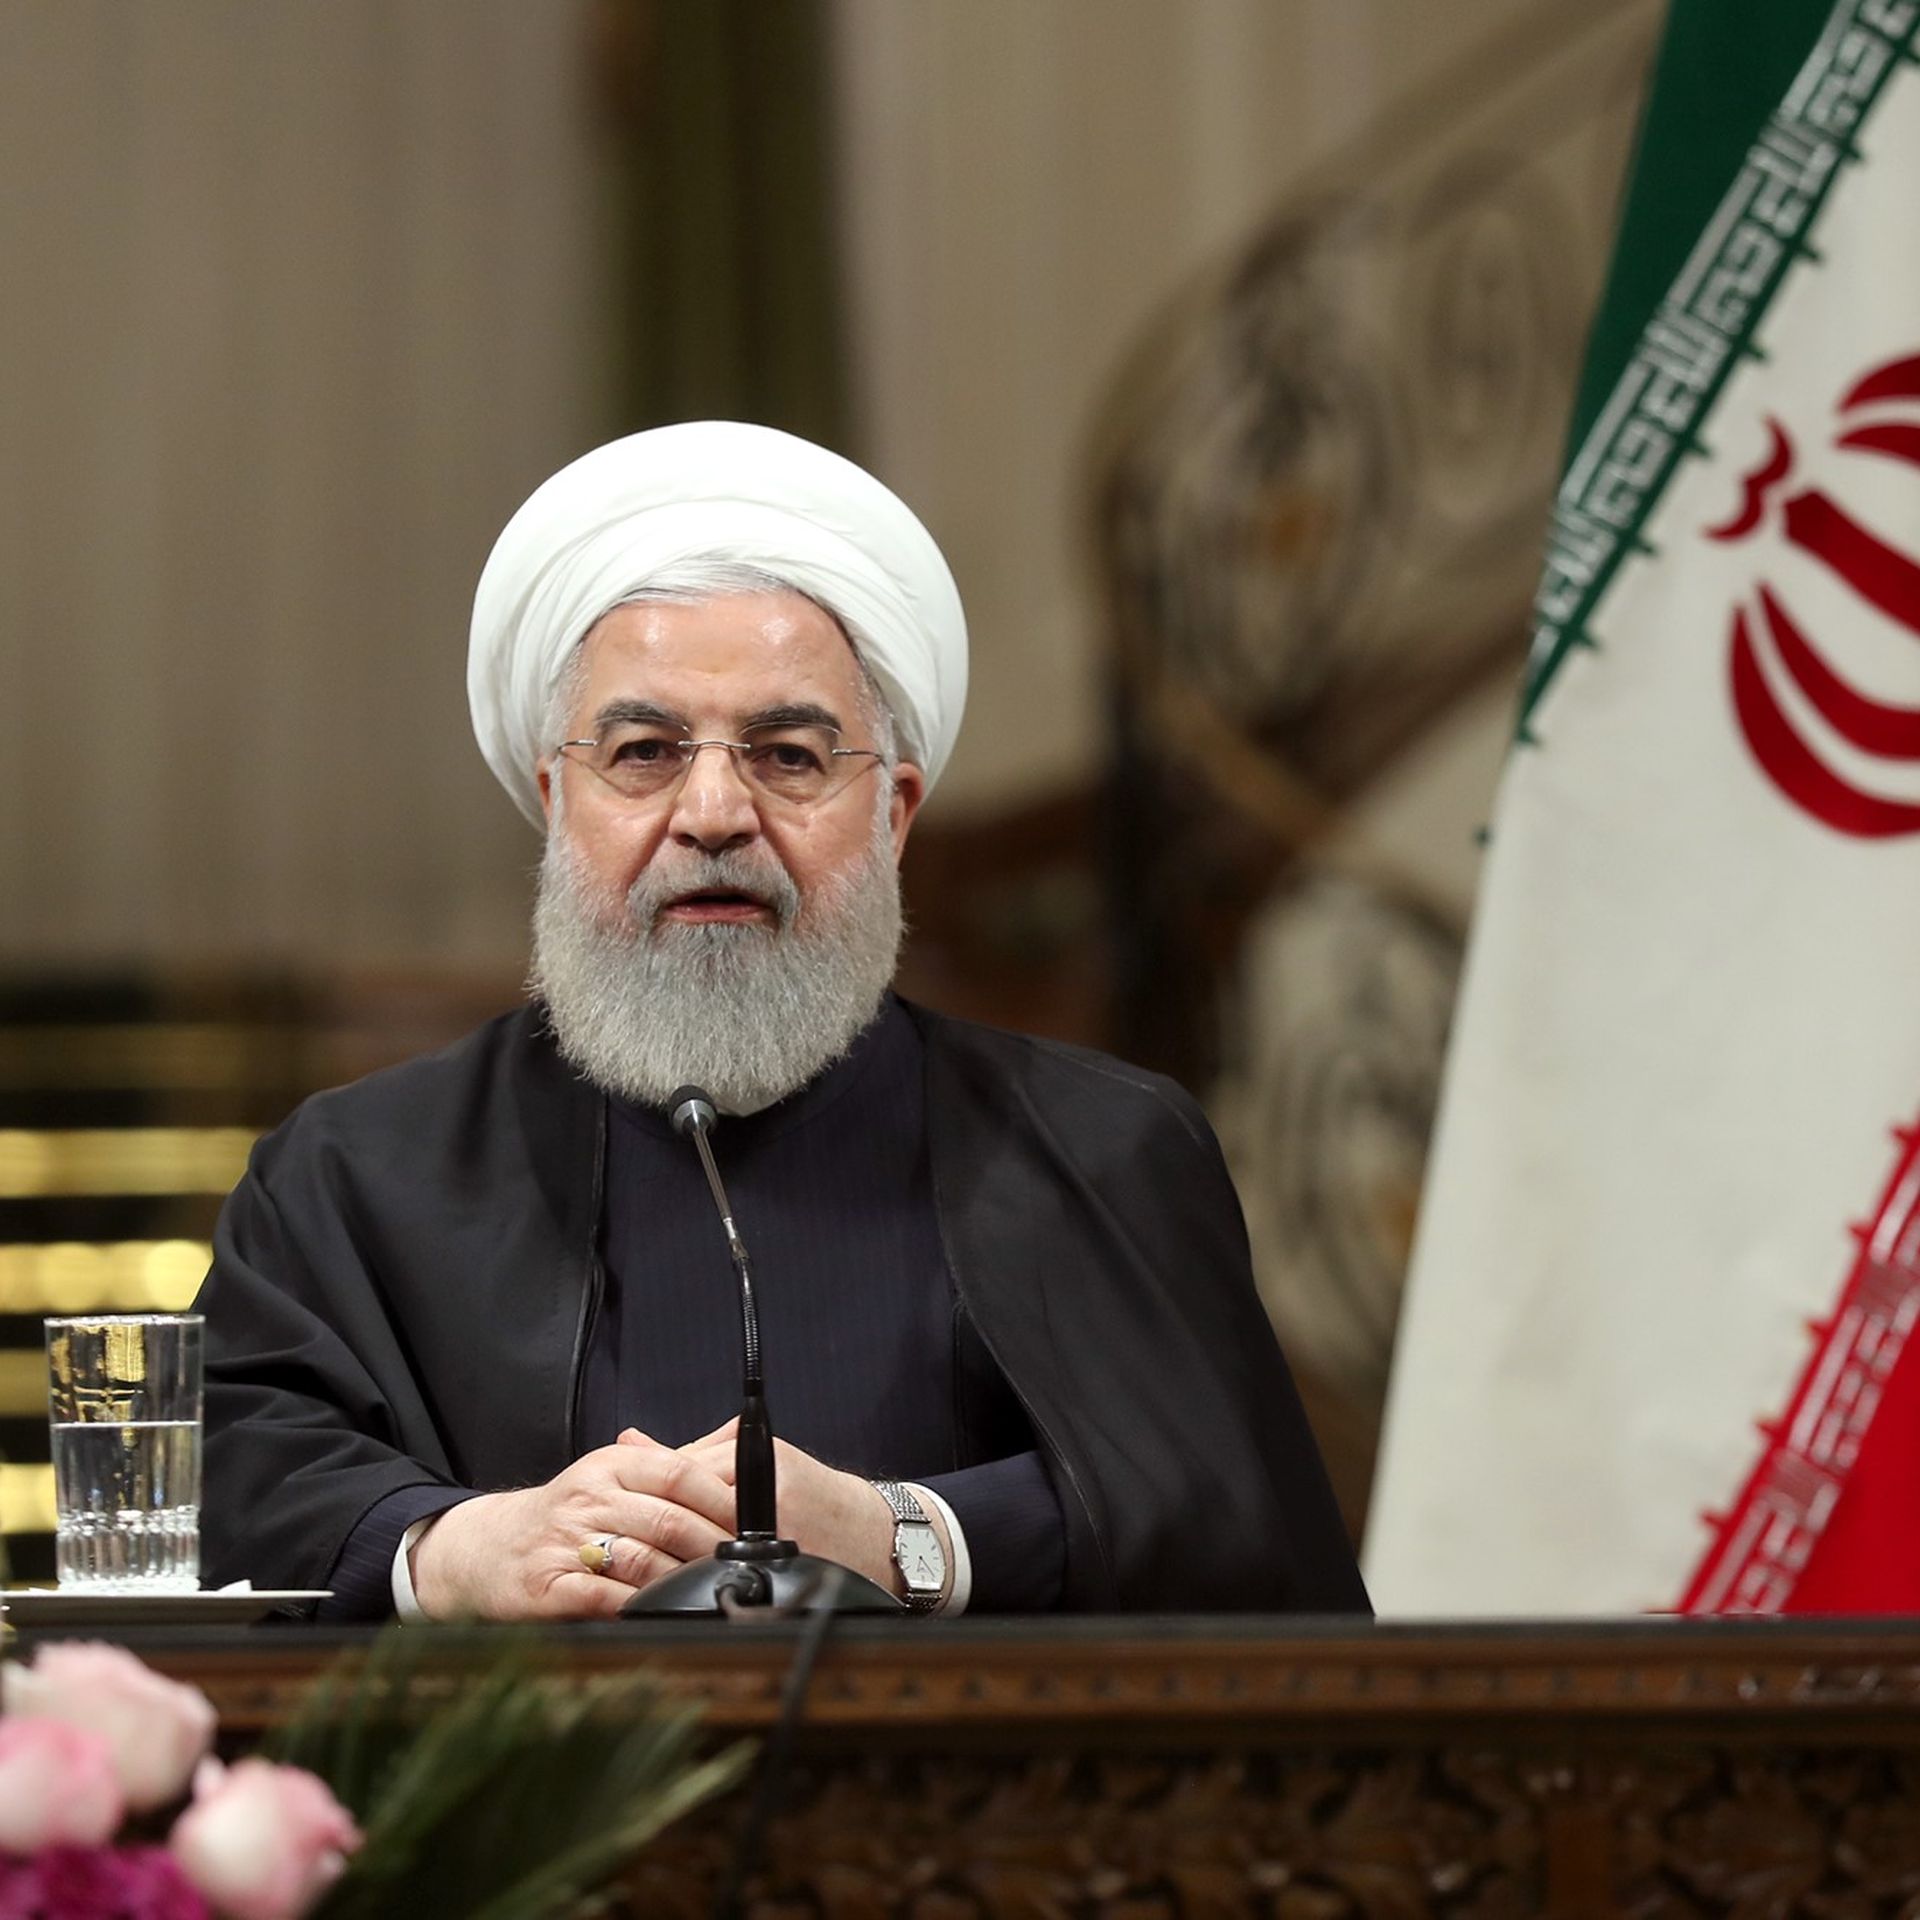 Hassan Rouhani seated at a press conference